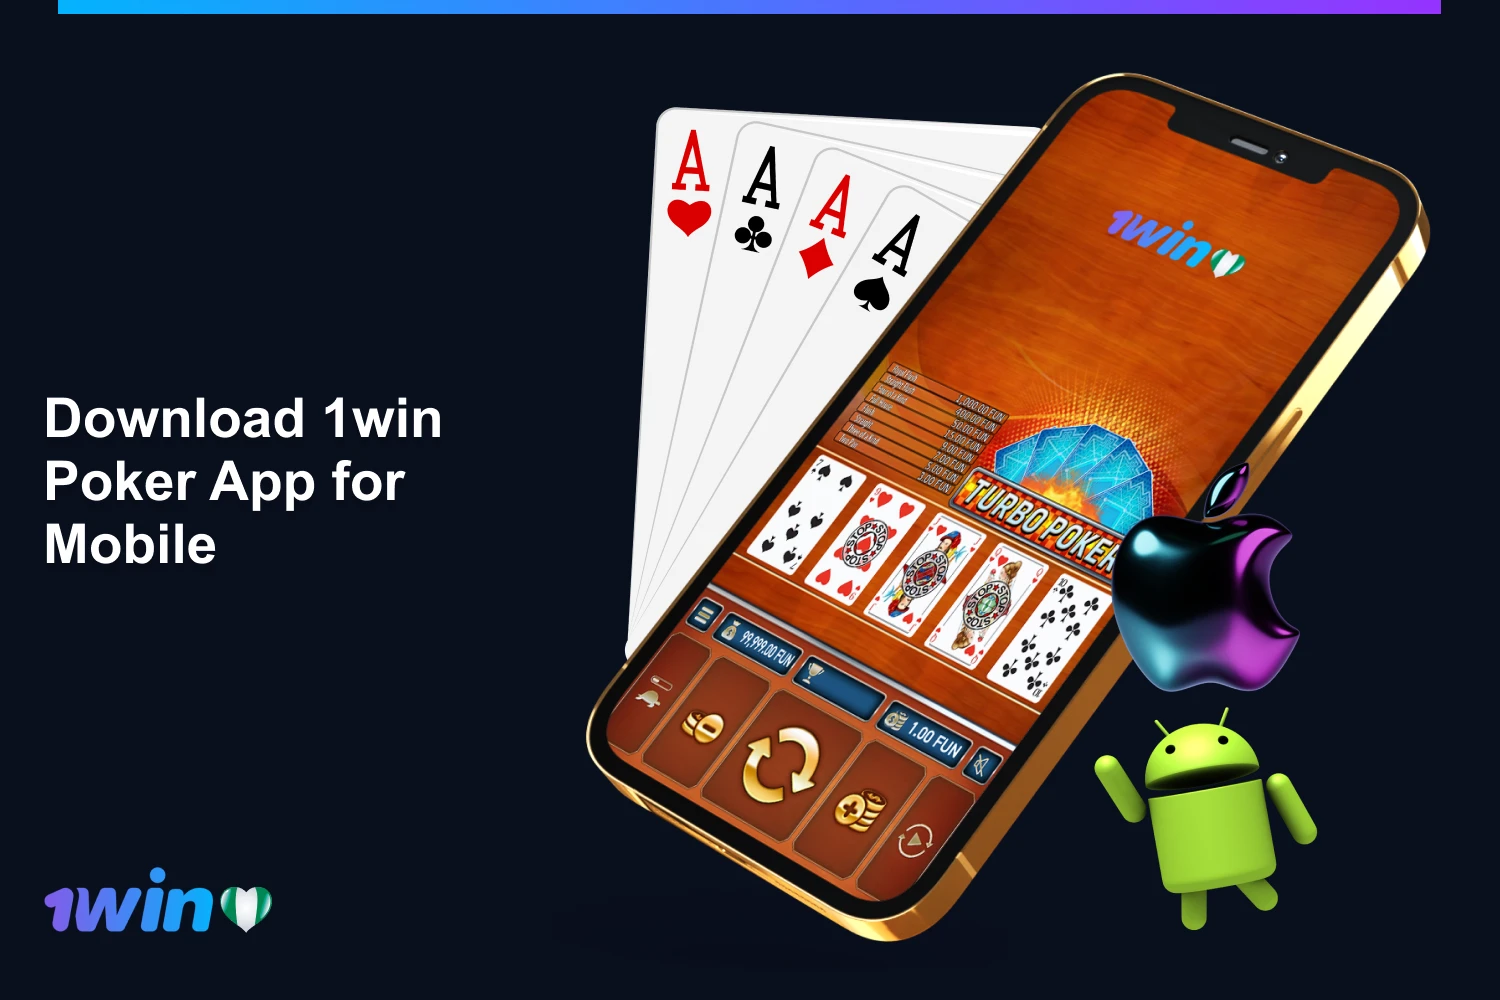 Players from Nigeria can download the user-friendly 1win poker mobile app for iOS or Android